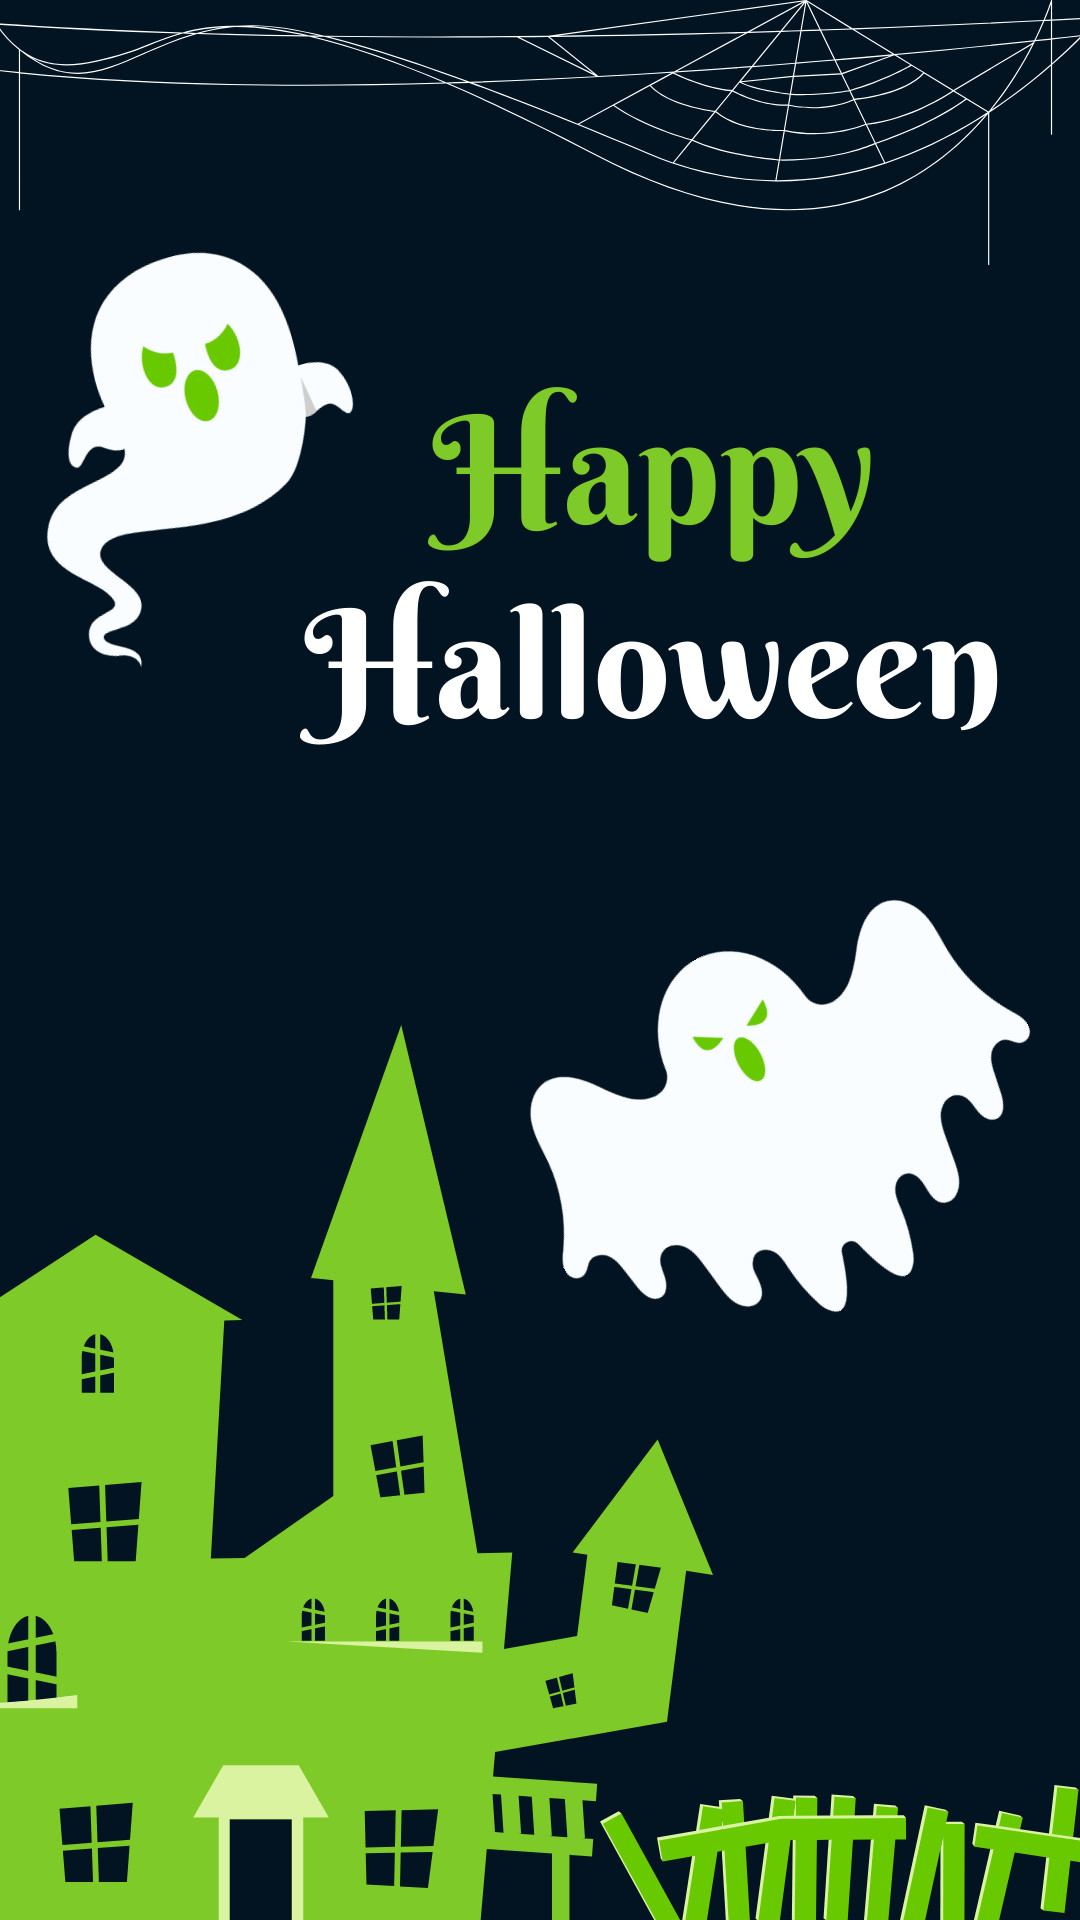 Happy Halloween with Ghosts Facebook Cover 820x360